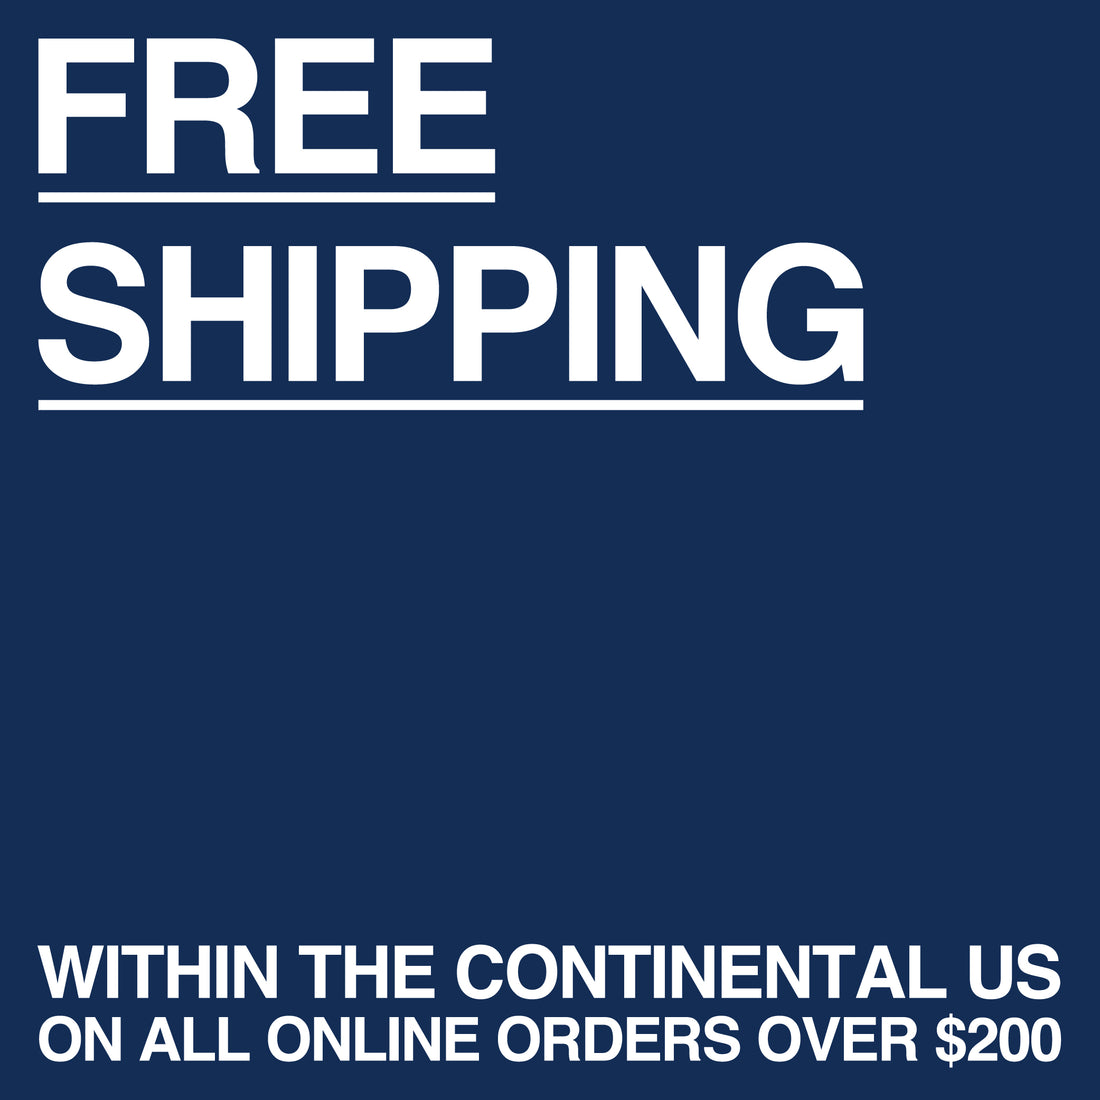 Free Shipping Service Started